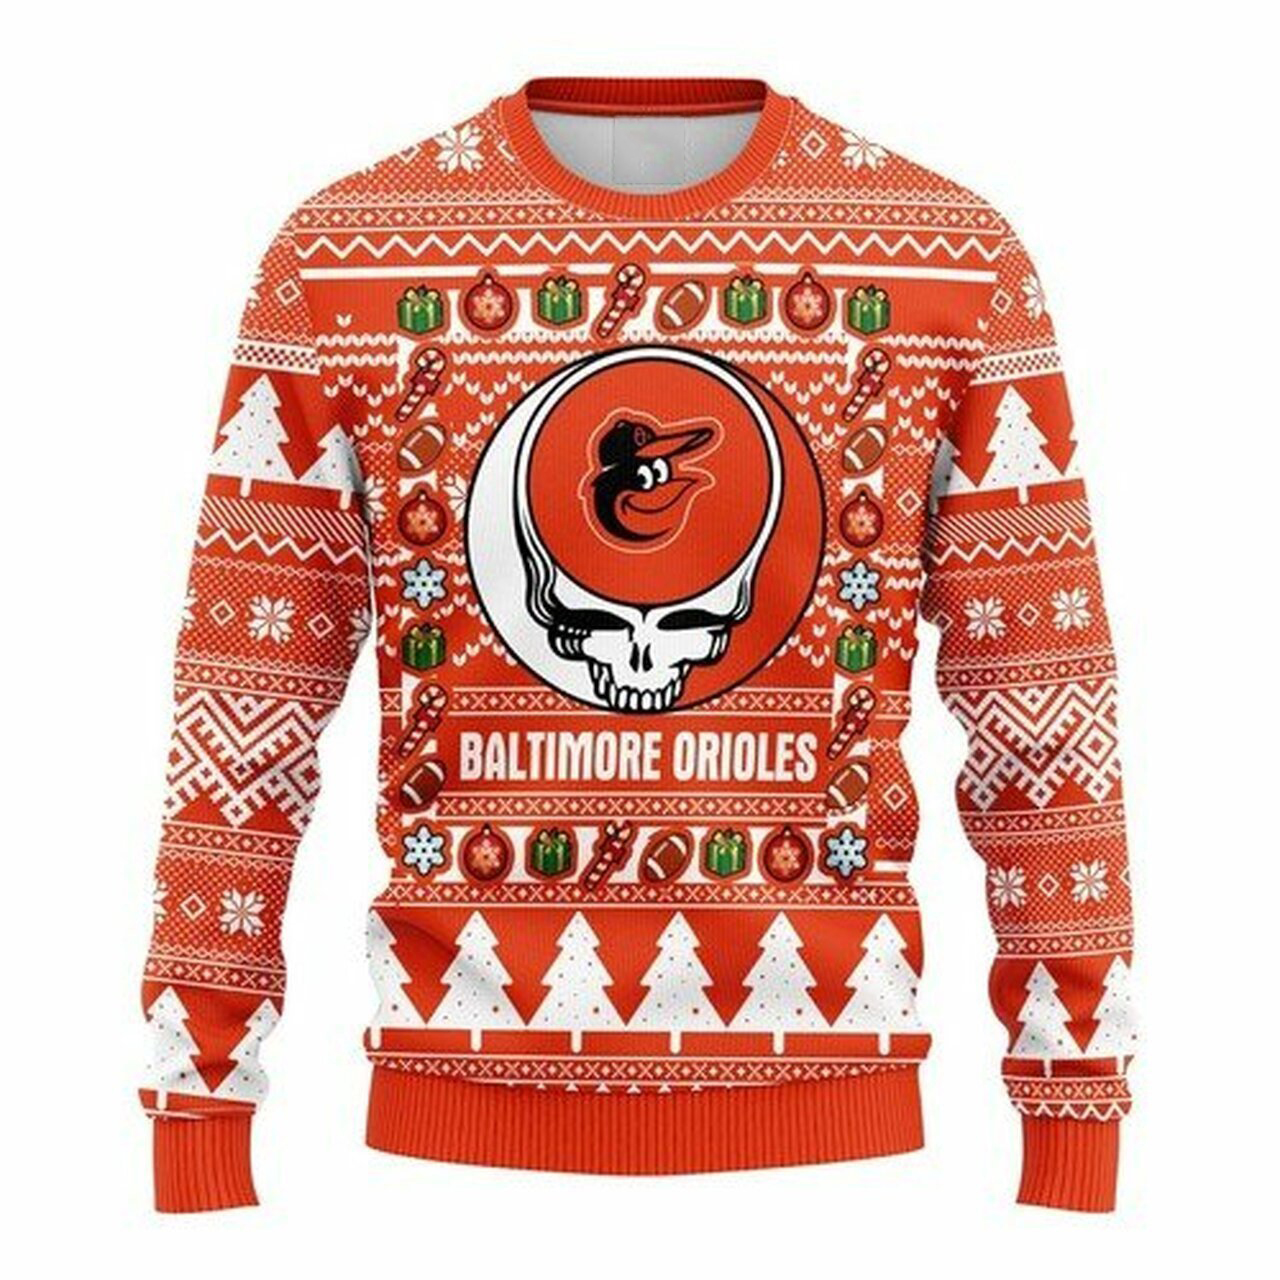 MLB Baltimore Orioles Grateful Dead ugly christmas sweater